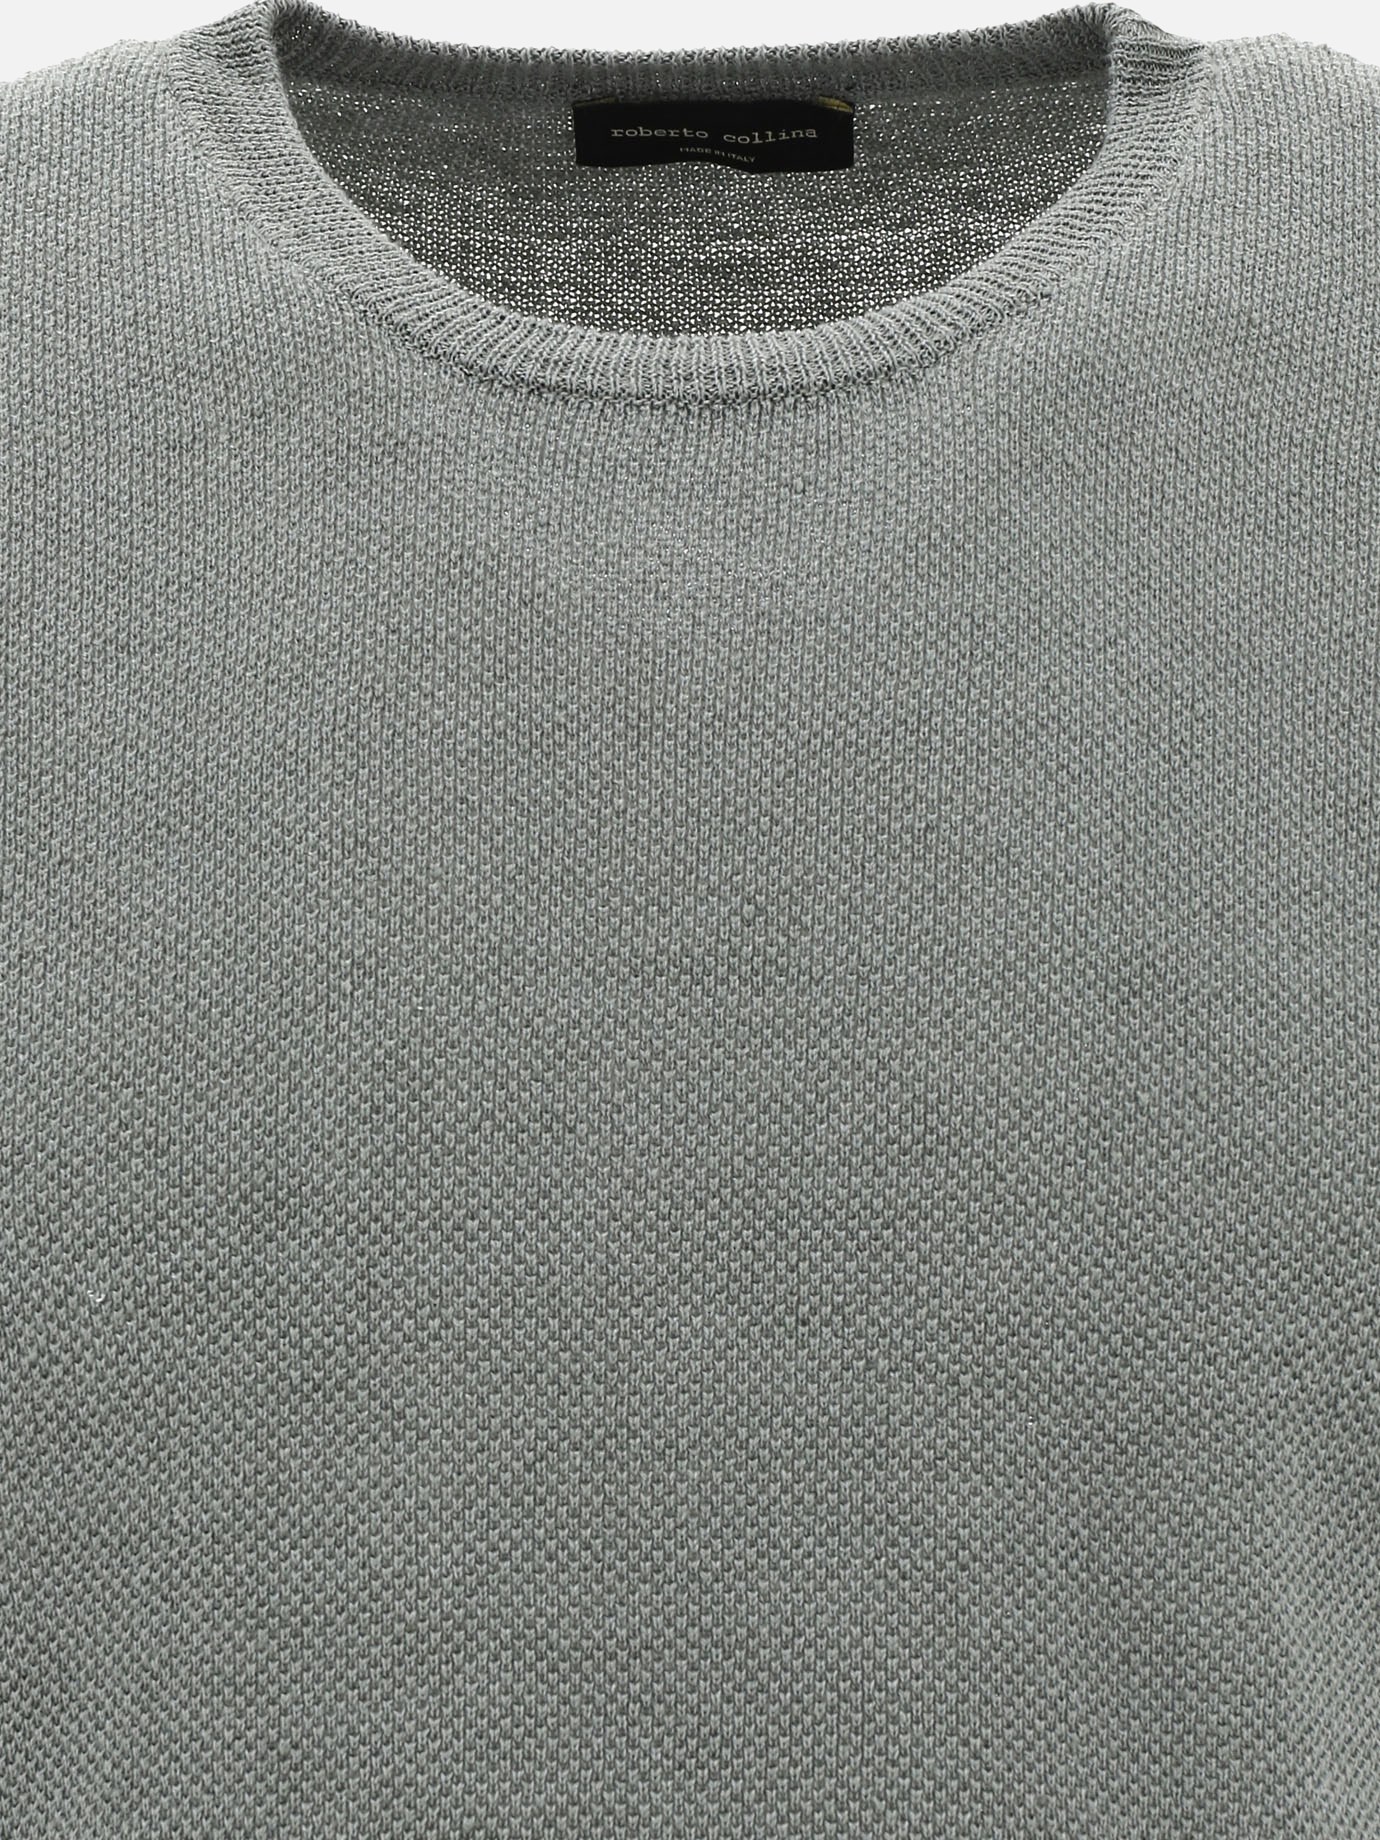 Knitted t-shirt by Roberto Collina